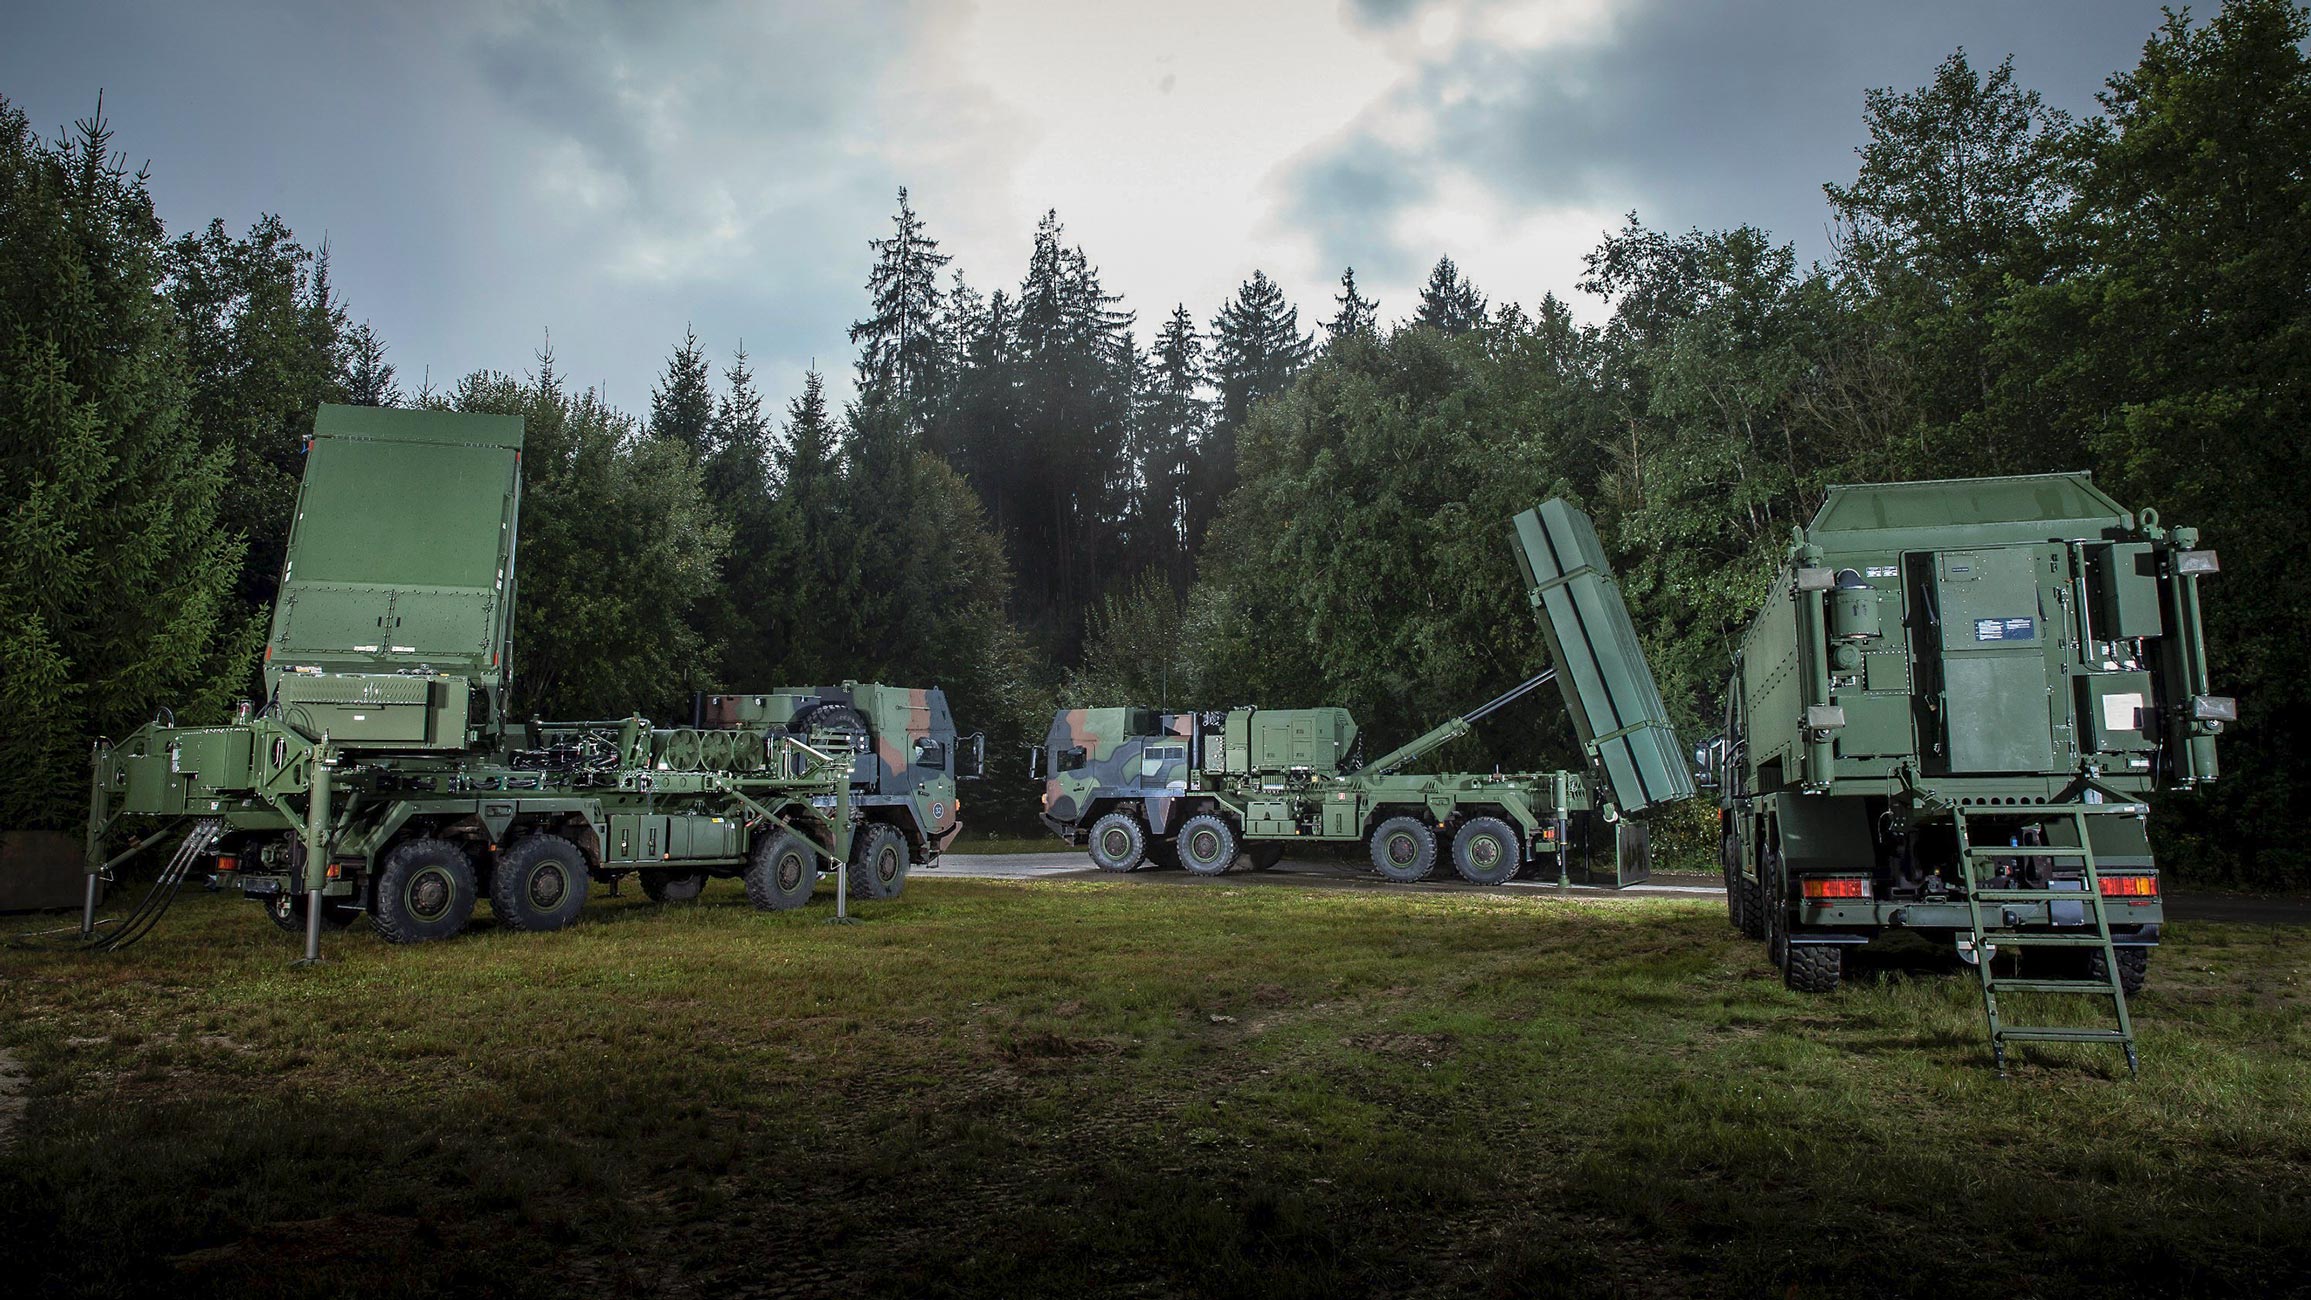 Medium Extended Air Defense System (MEADS)